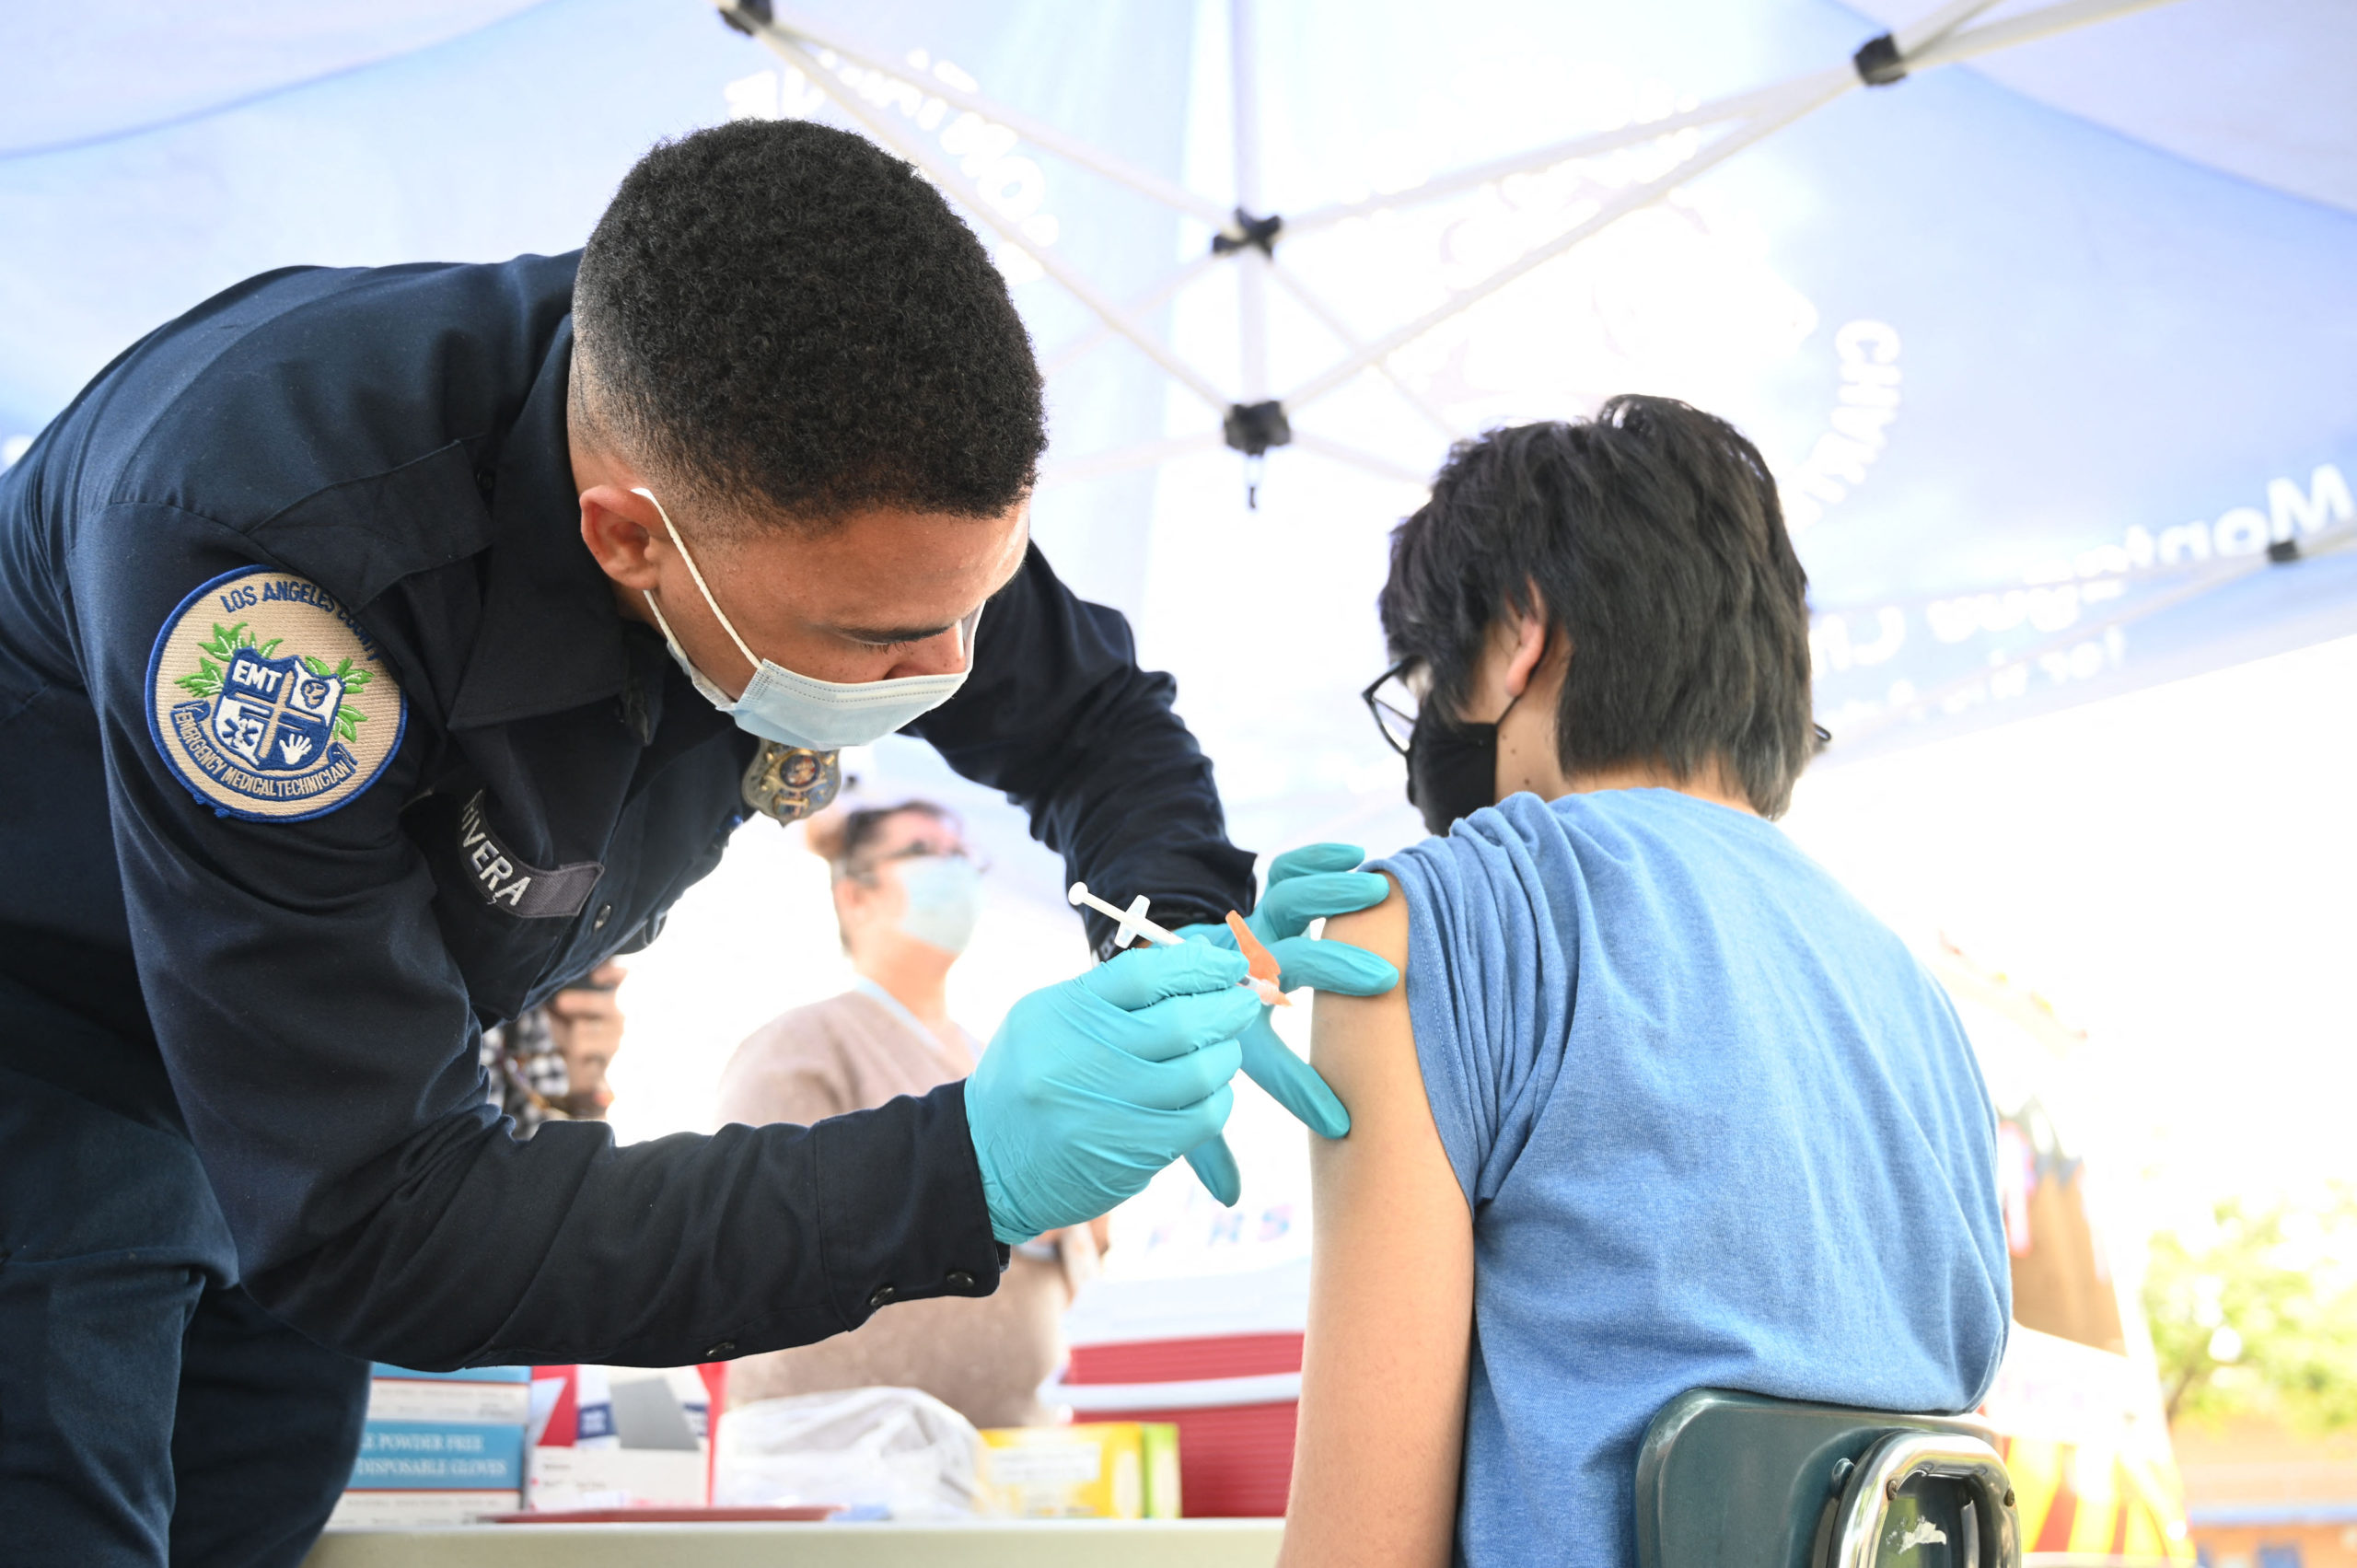 Brandon Rivera, a Los Angeles County emergency medical technician, gives a second does of Pfizer-BioNTech Covid-19 vaccine to Aaron Delgado, 16, at a pop up vaccine clinic in the Arleta neighborhood of Los Angeles, California, August 23, 2021. (ROBYN BECK/AFP via Getty Images)